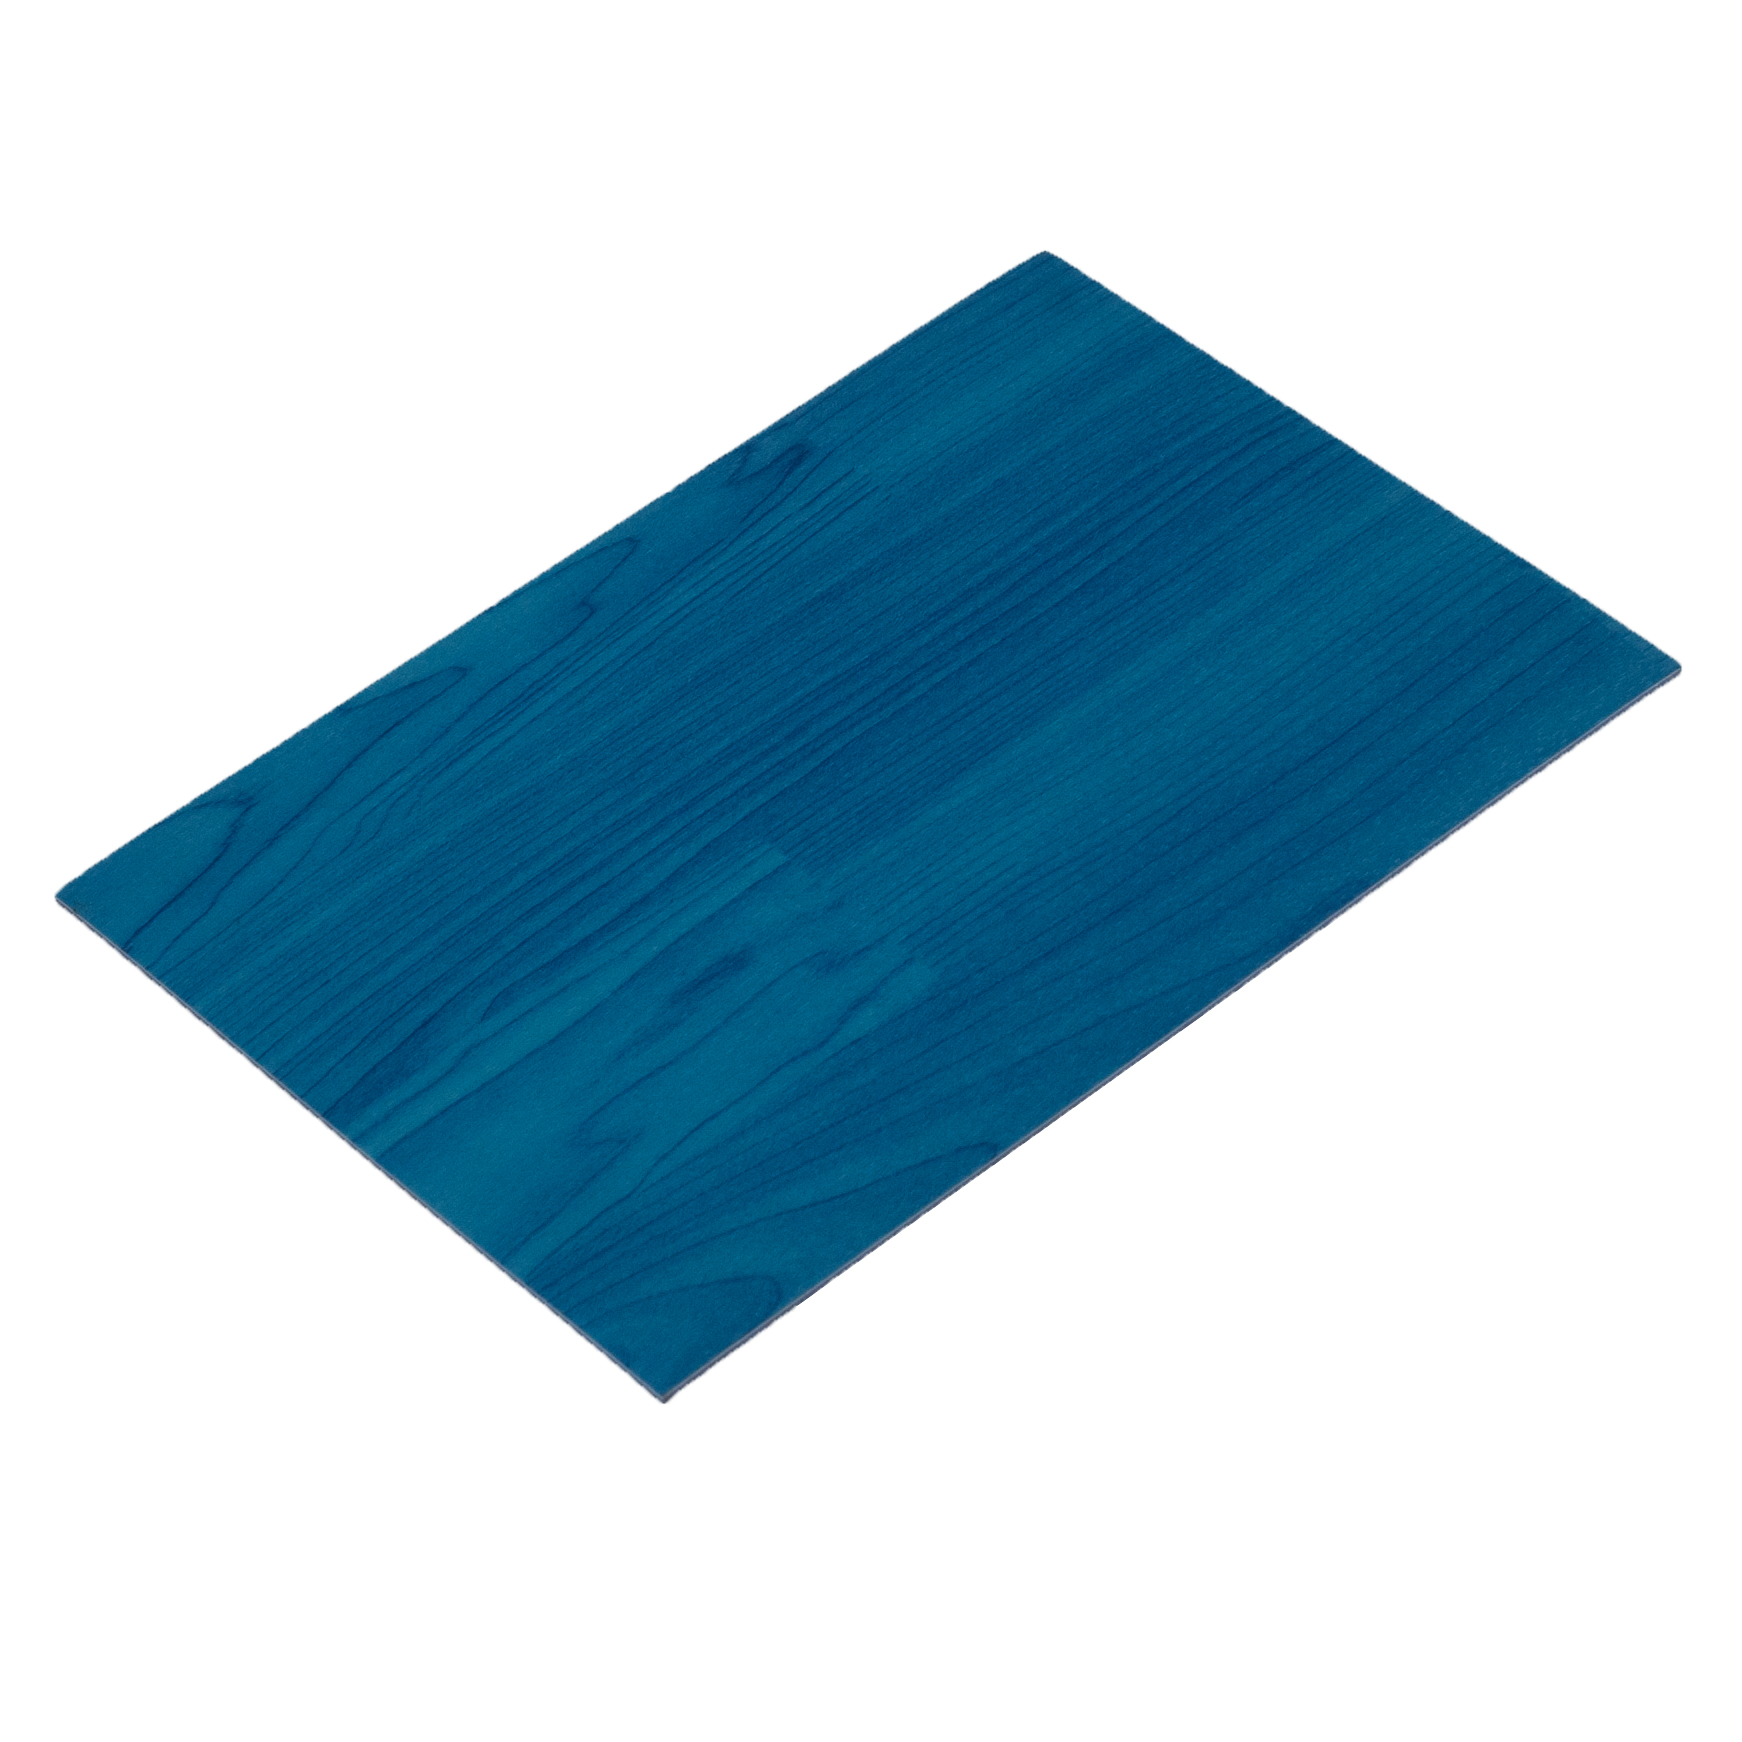 2018high Quality Waterproof PVC Sports Flooring for Pingpong, Tennis Court, Indoor PVC Sports Flooring for Badminton Court Mat